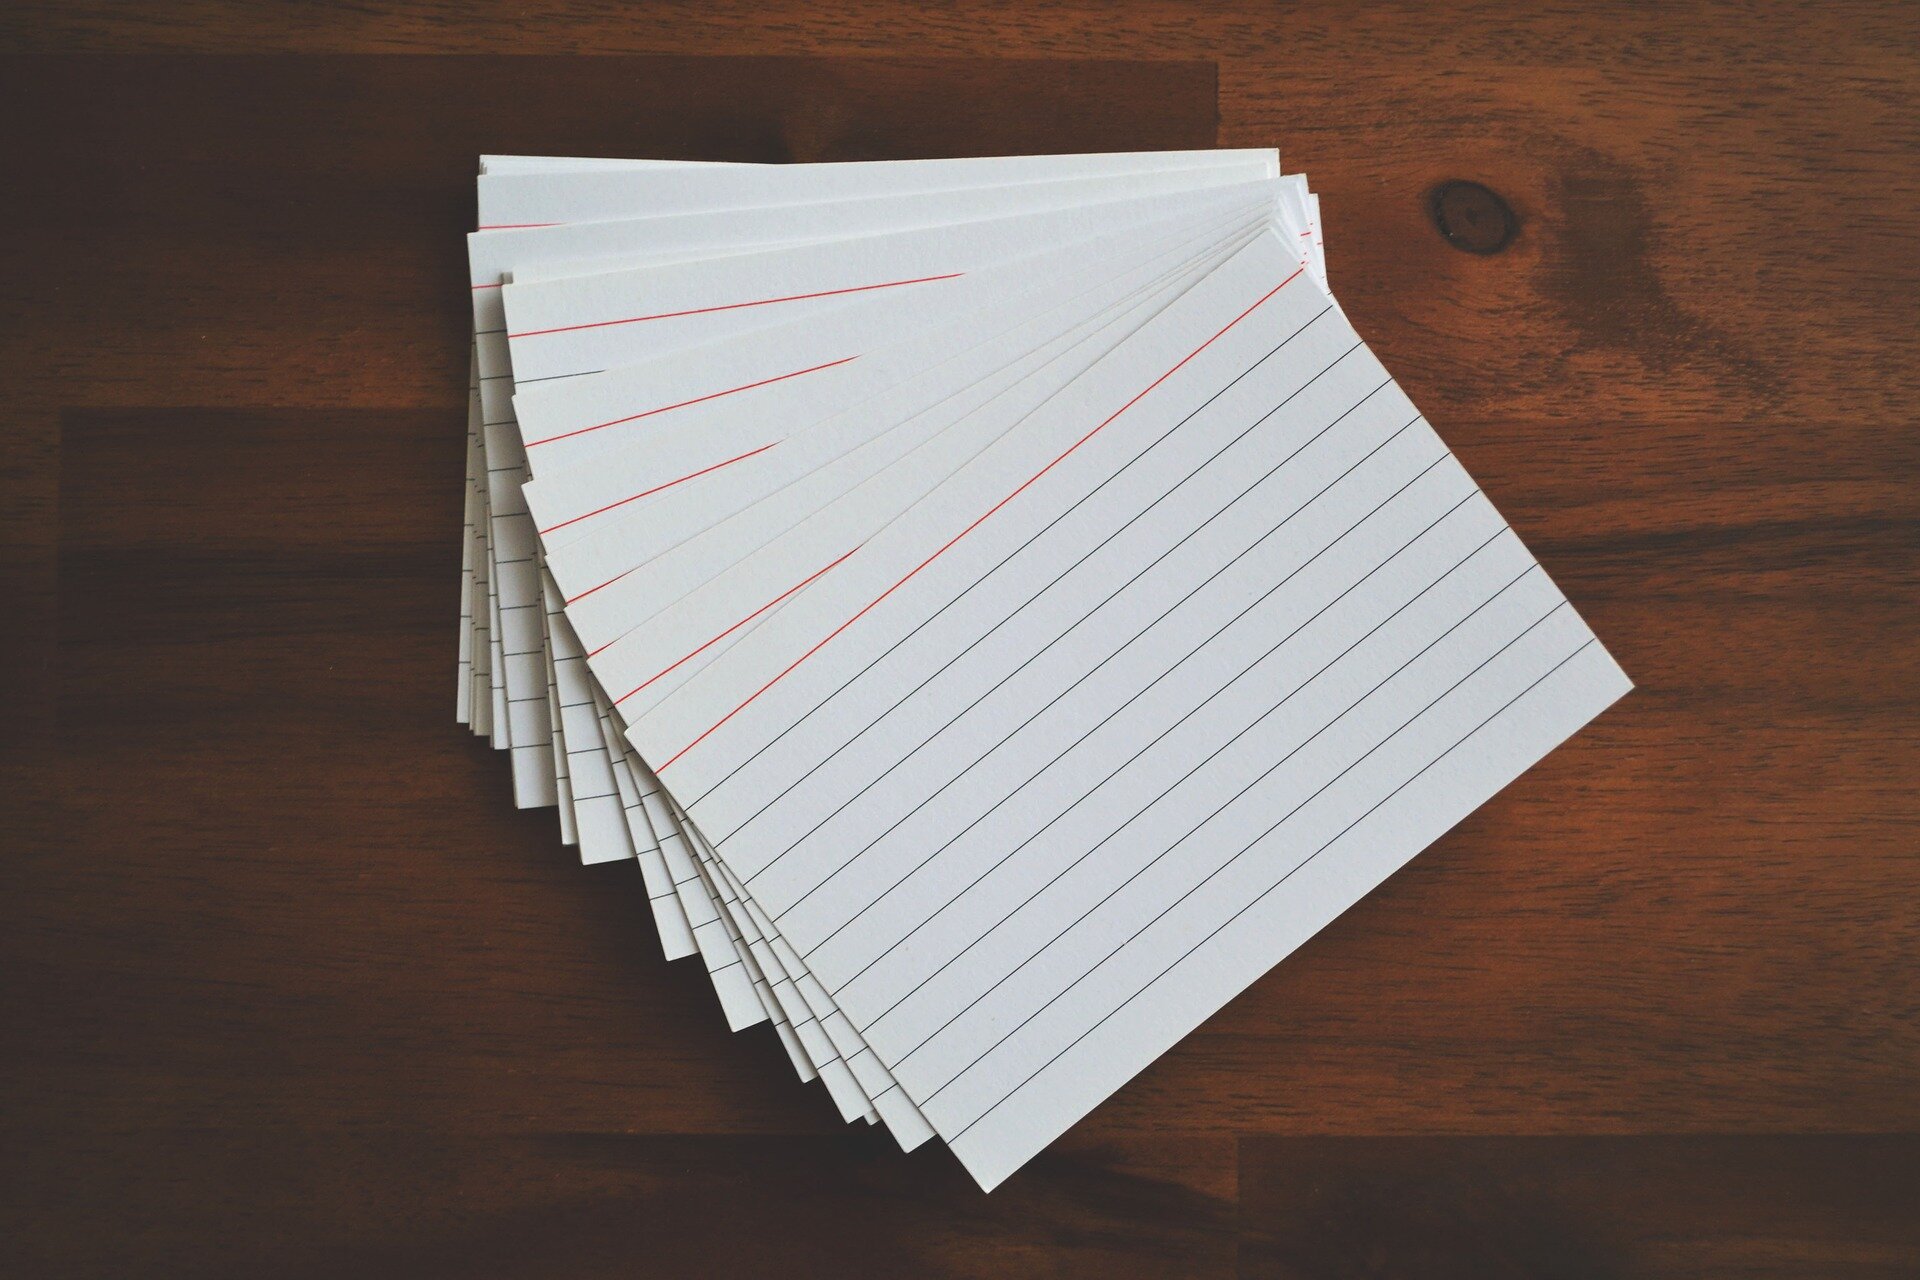 Flashcards: Are you using them effectively when learning?